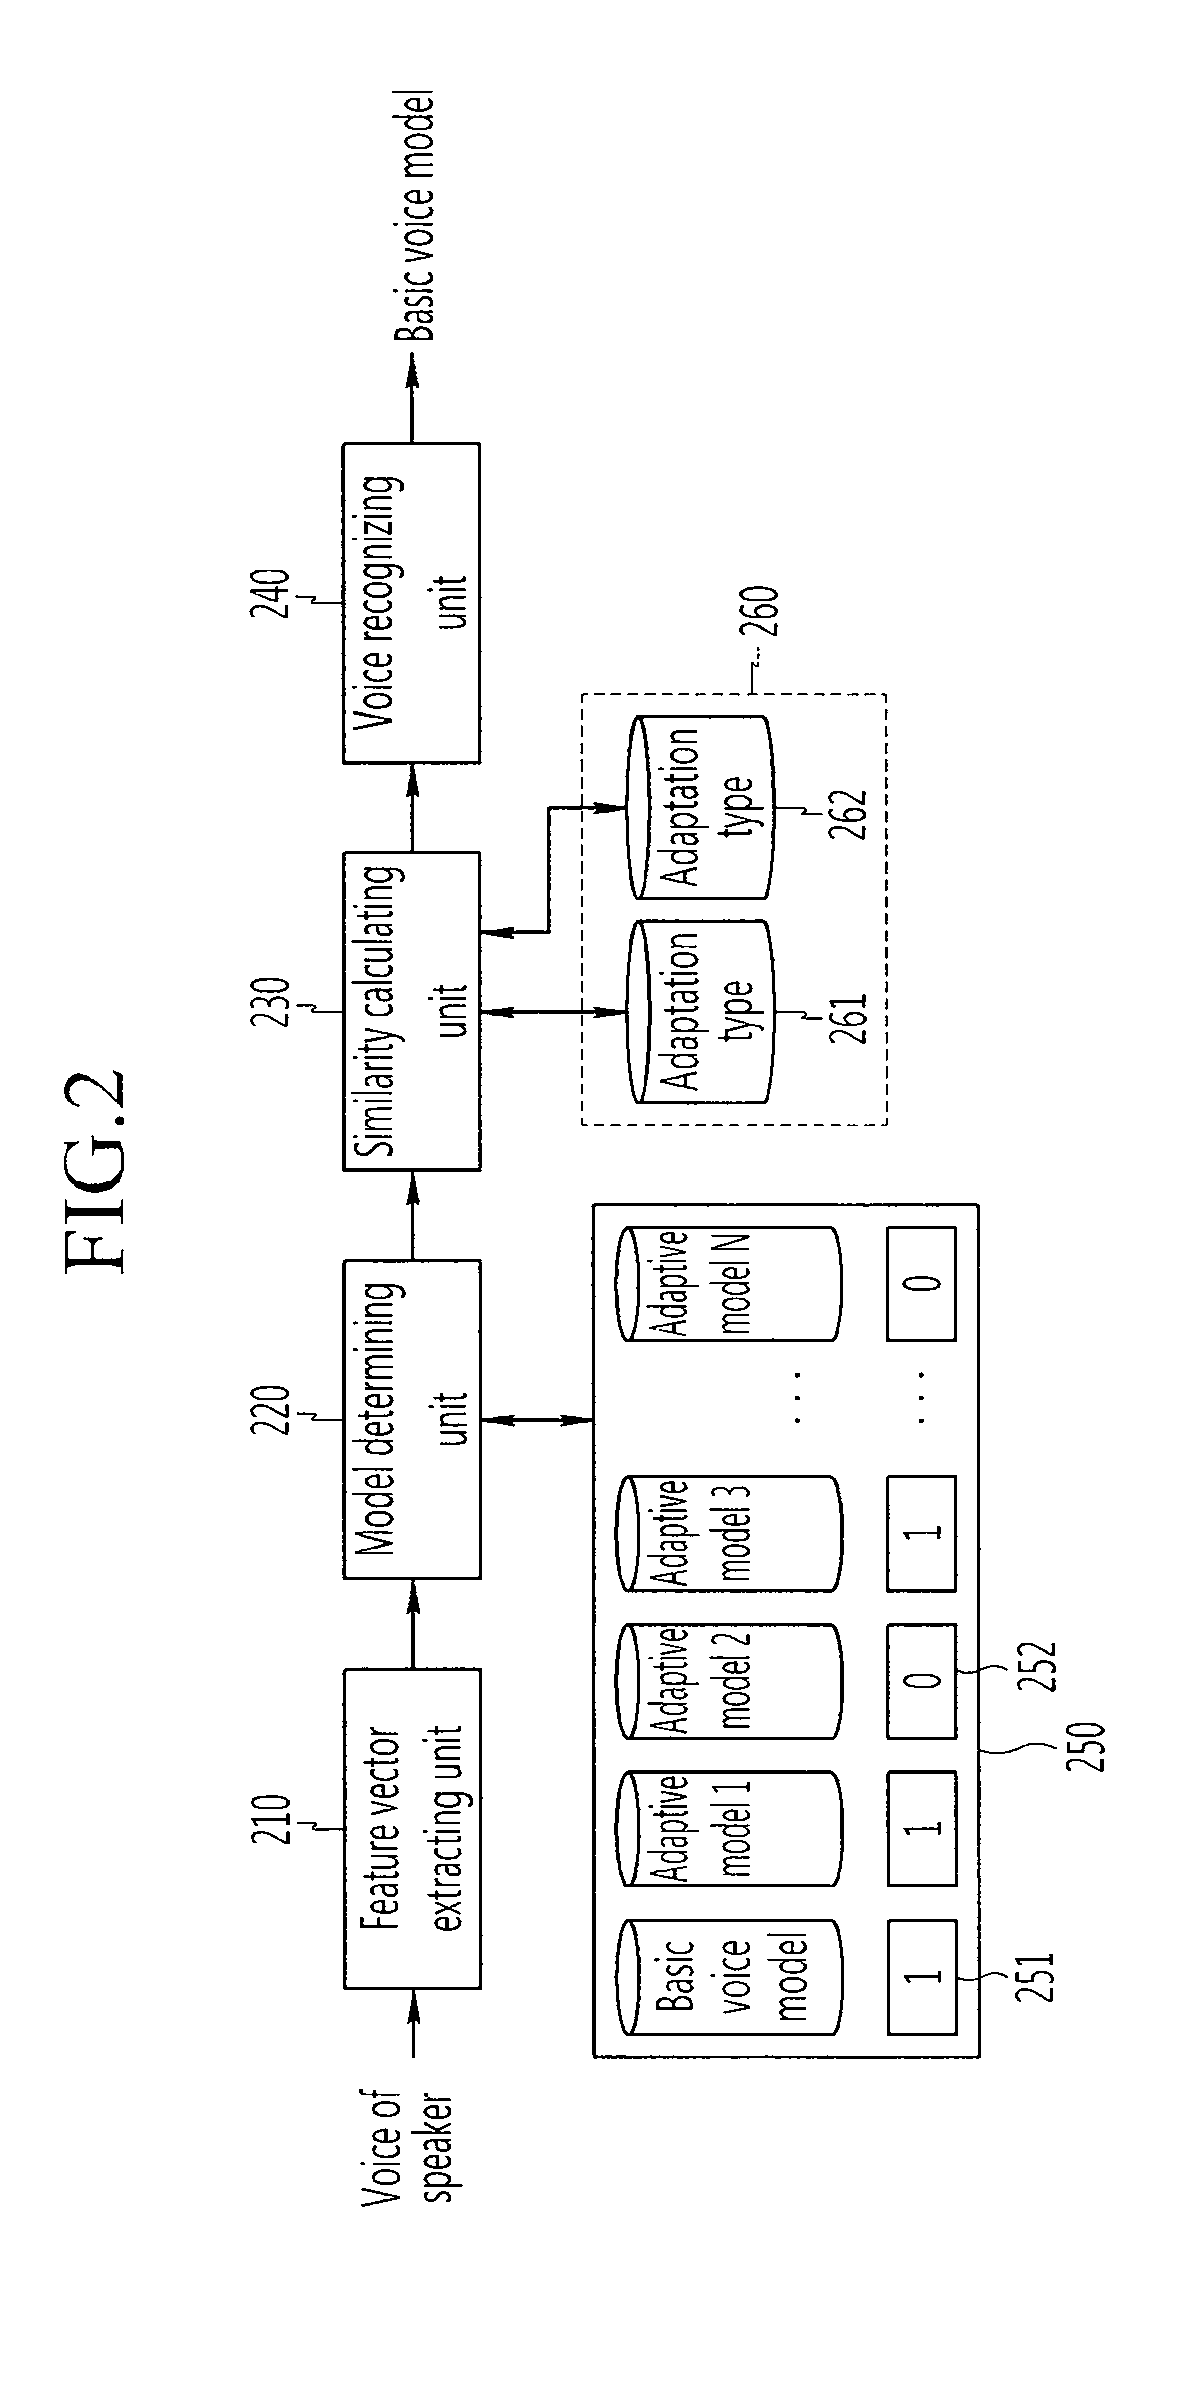 System and method of multi model adaptation and voice recognition